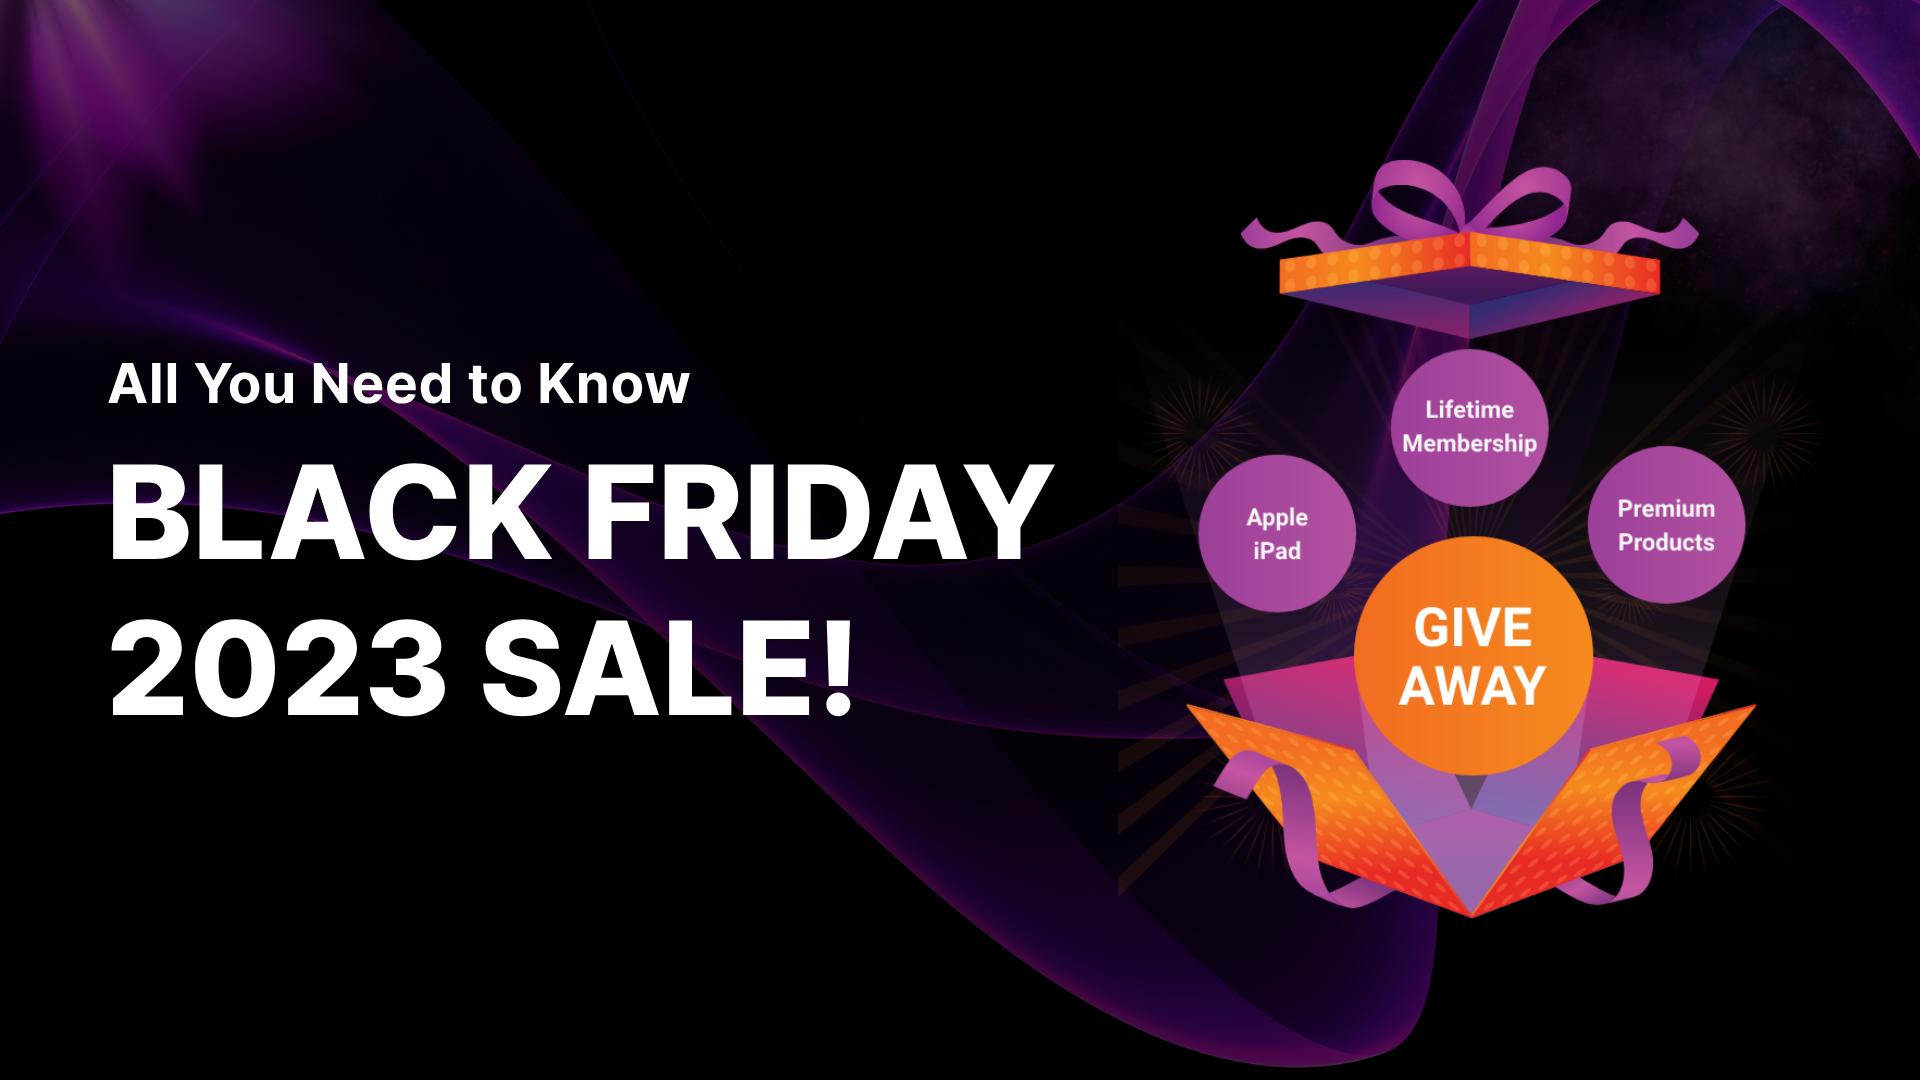 All you need to know about our Black Friday 2023 sale